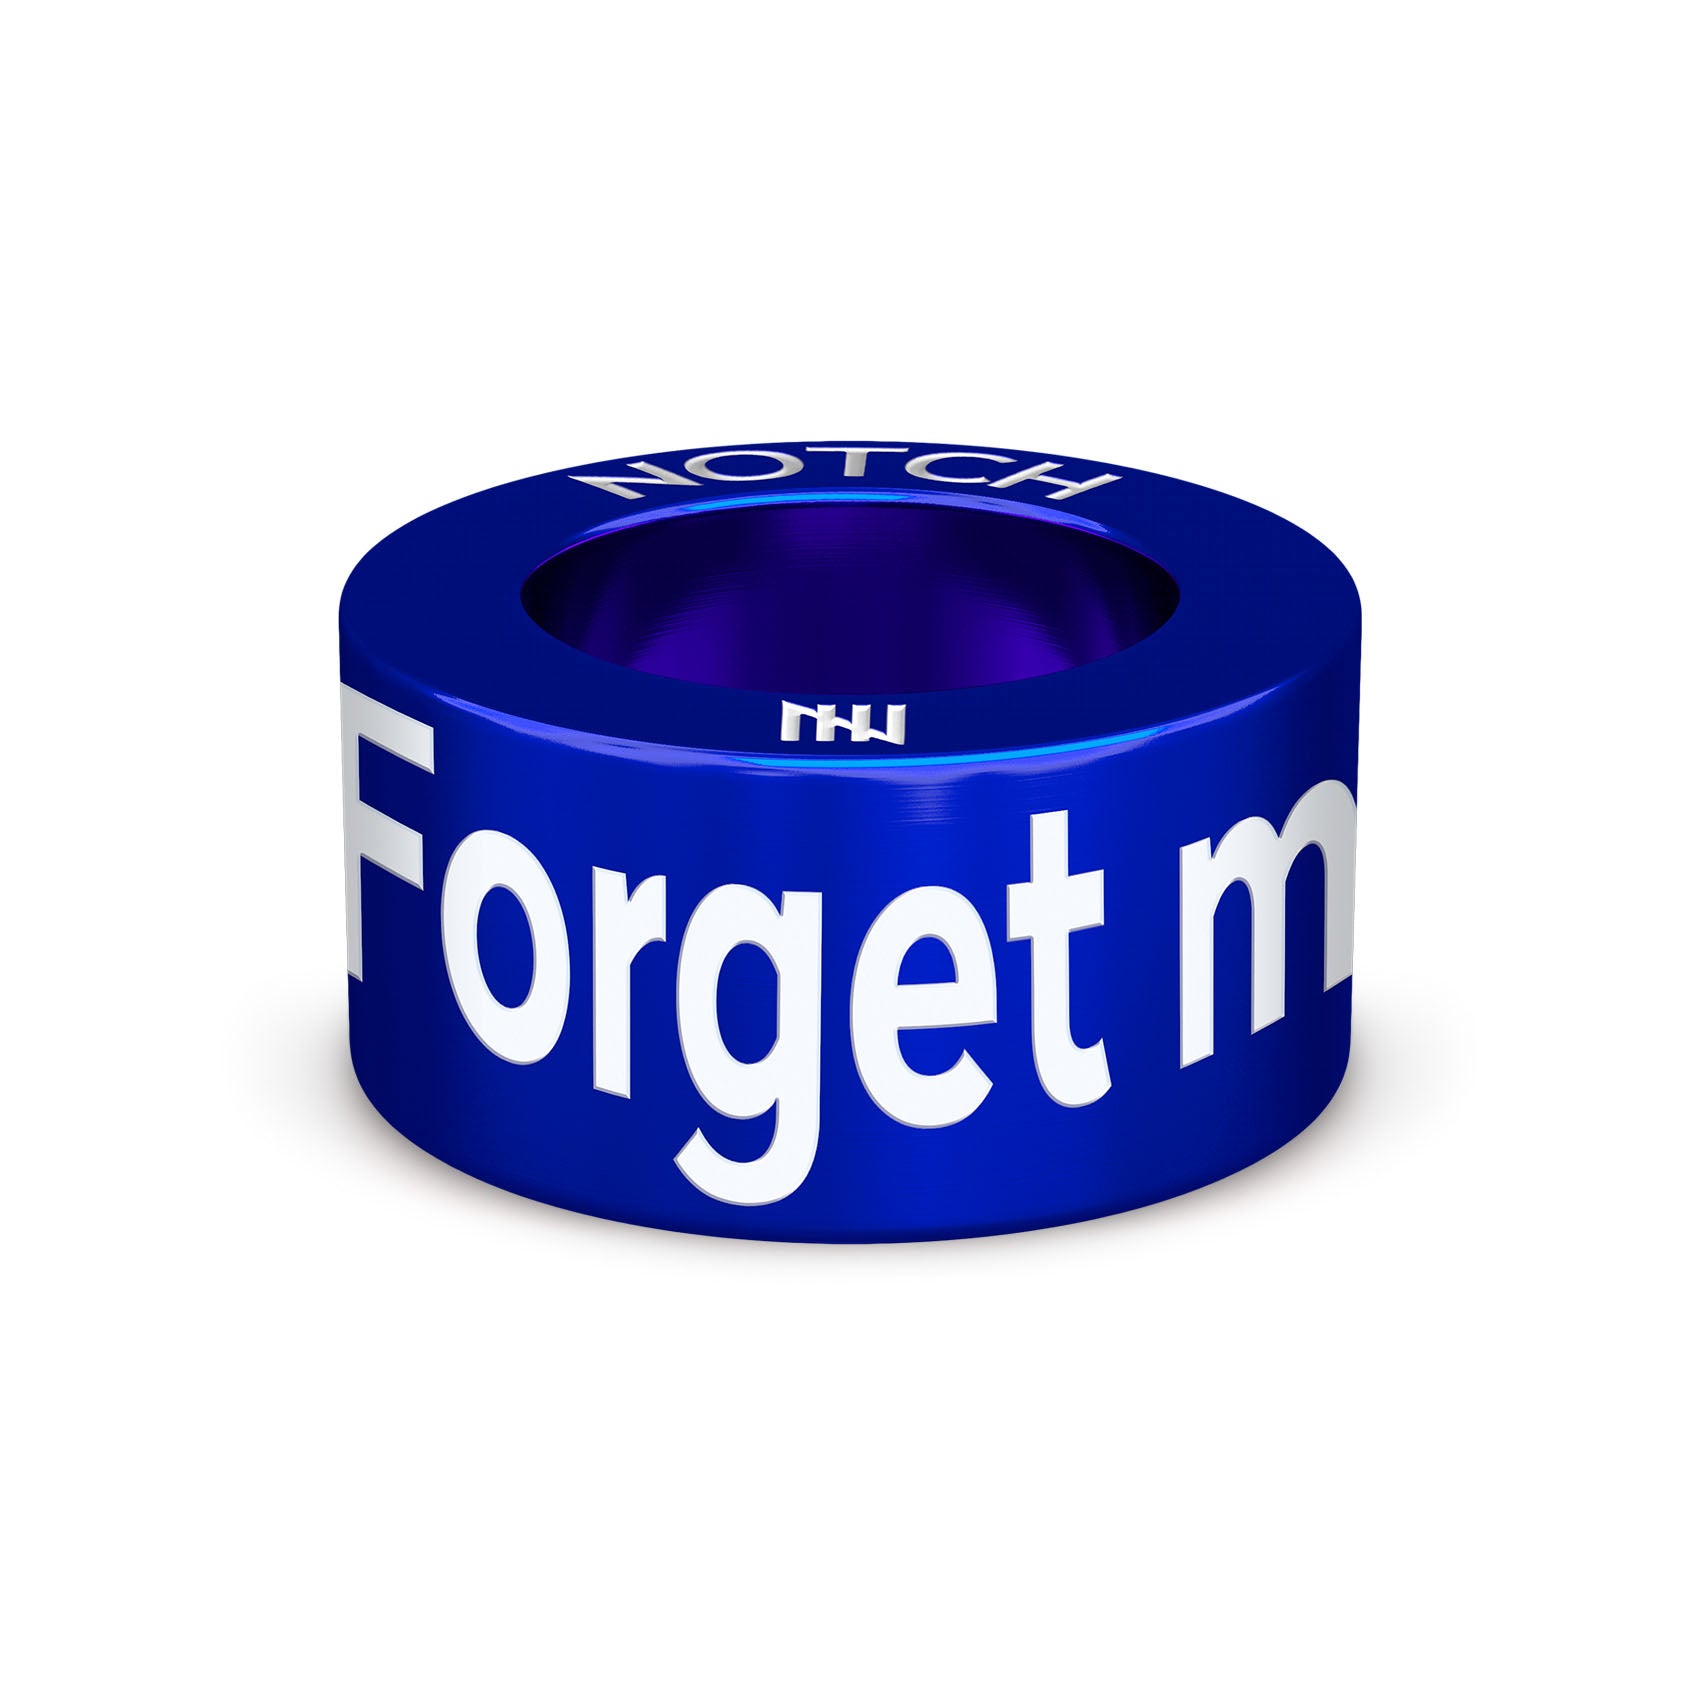 Forget me not NOTCH Charm